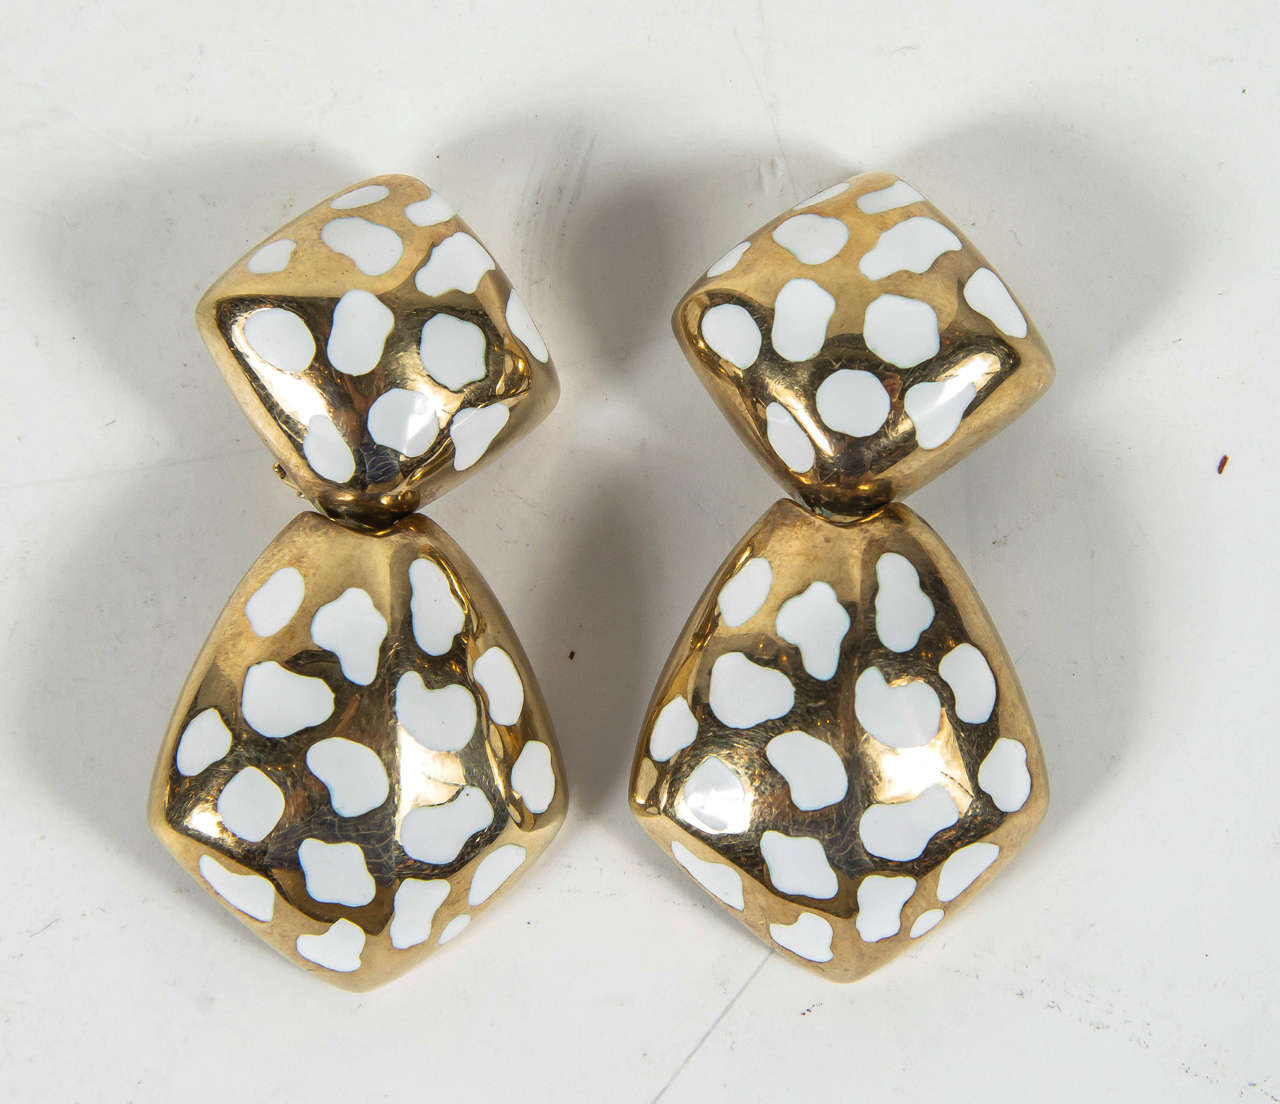 These drop earrings feature an organic form wrought in 14 k yellow gold with amorphic inlays of white enamel. These earrings would particularly look exceptional on in the summer.They are clip on earrings but can be converted to posts as well. These